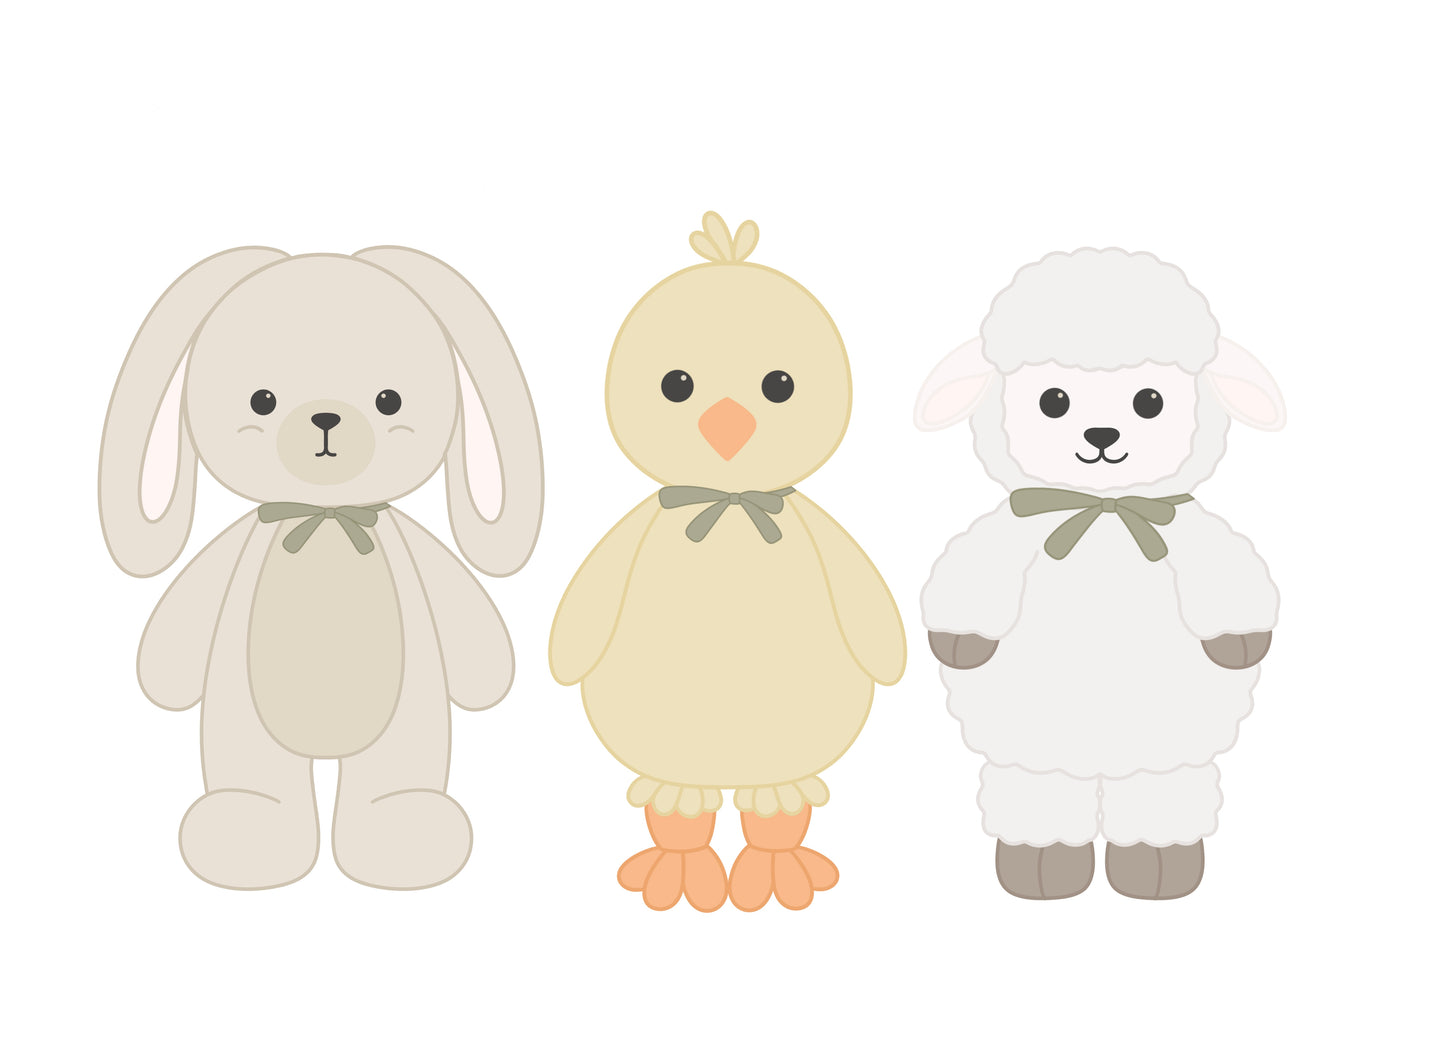 Bunny, Chick, Sheep/Lamb Doll-like Cookie Cutters